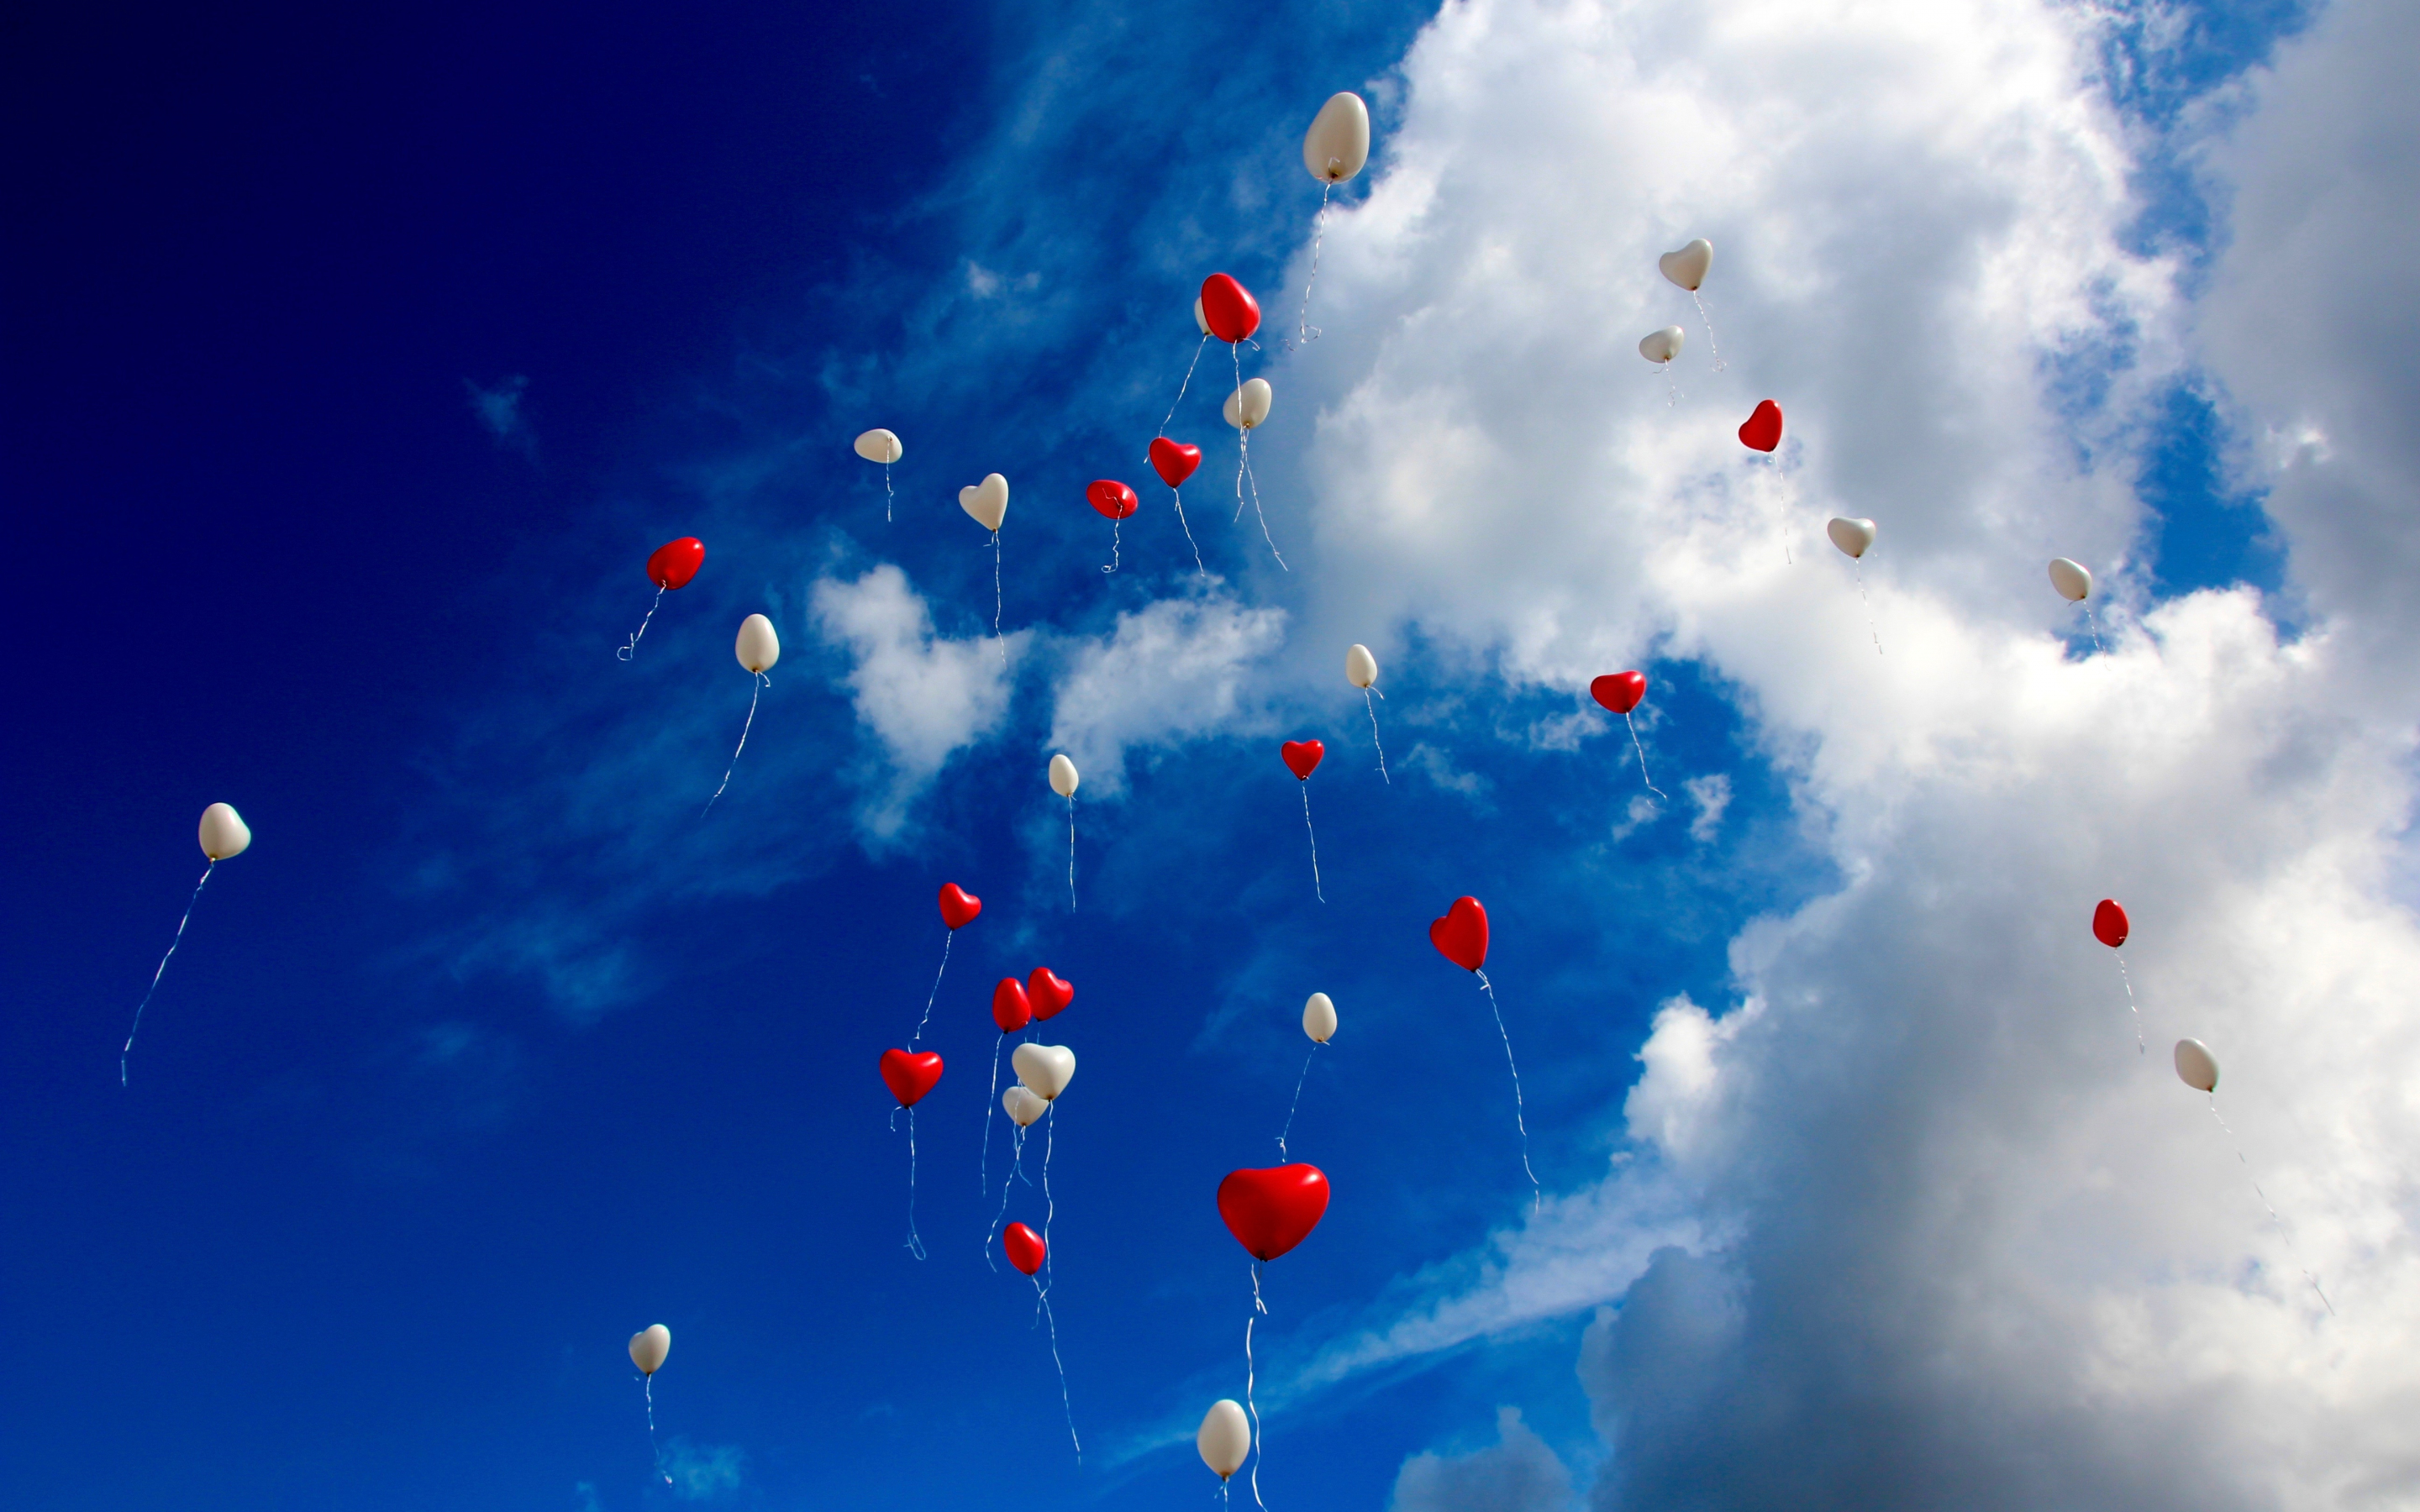 Balloons, sky, red and white, clouds, 2880x1800 wallpaper